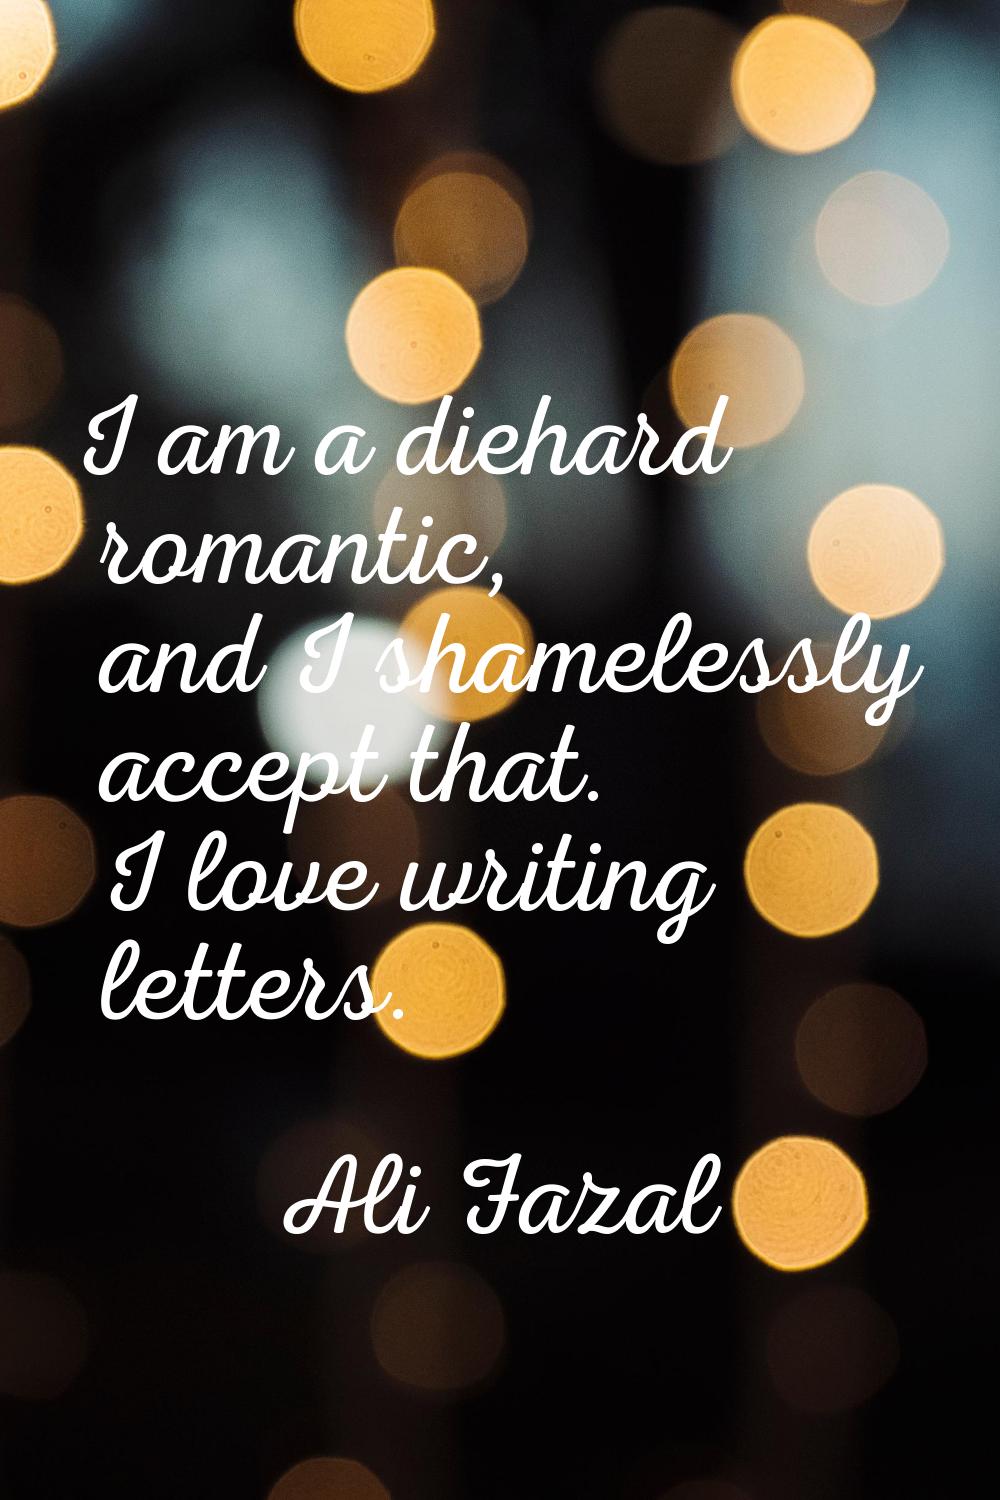 I am a diehard romantic, and I shamelessly accept that. I love writing letters.